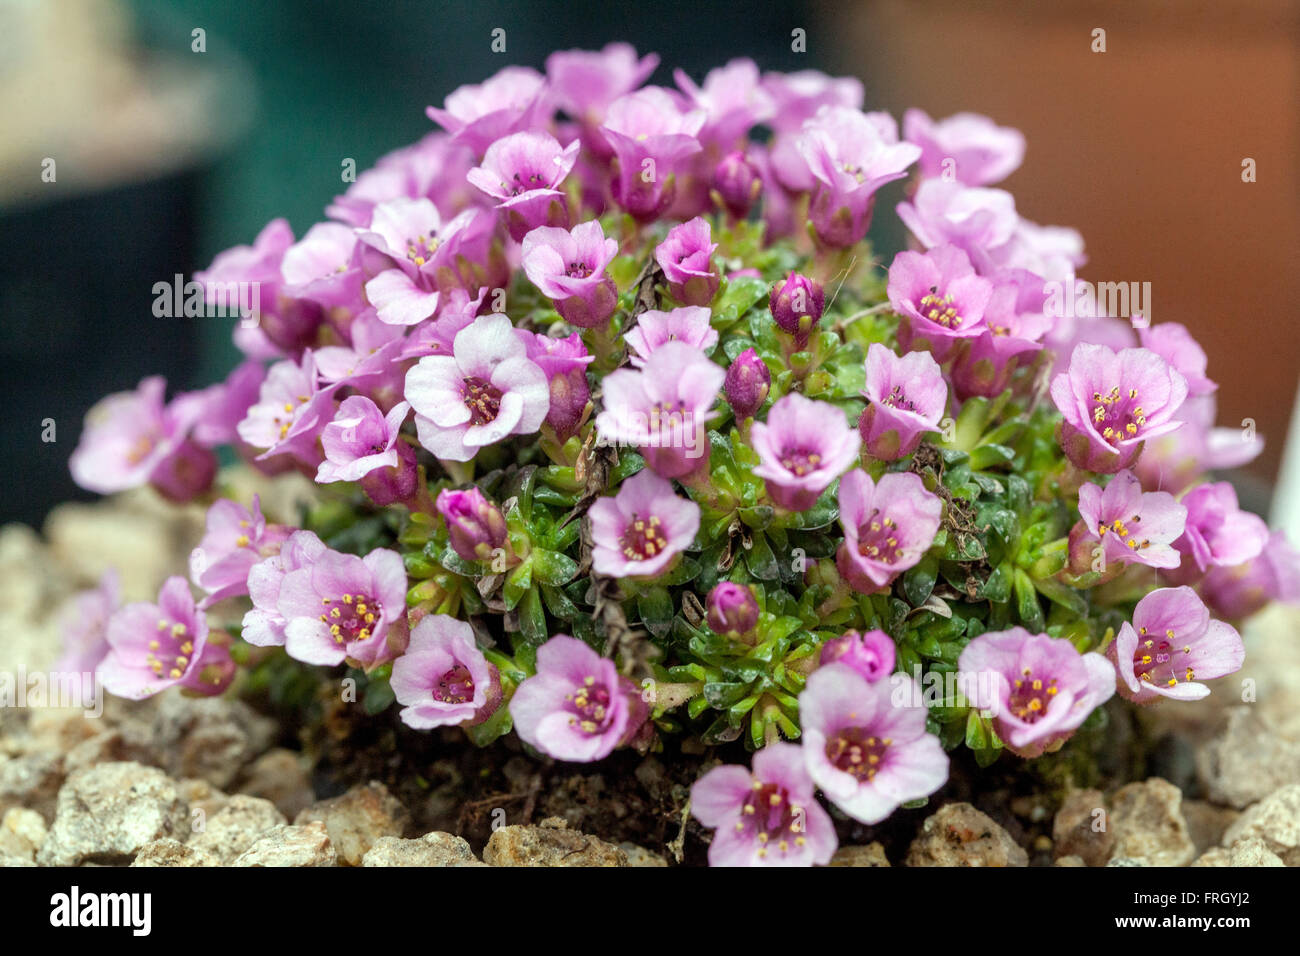 Saxifraga 'Gerald Phillip' saxifrage alpin rose moussy Banque D'Images